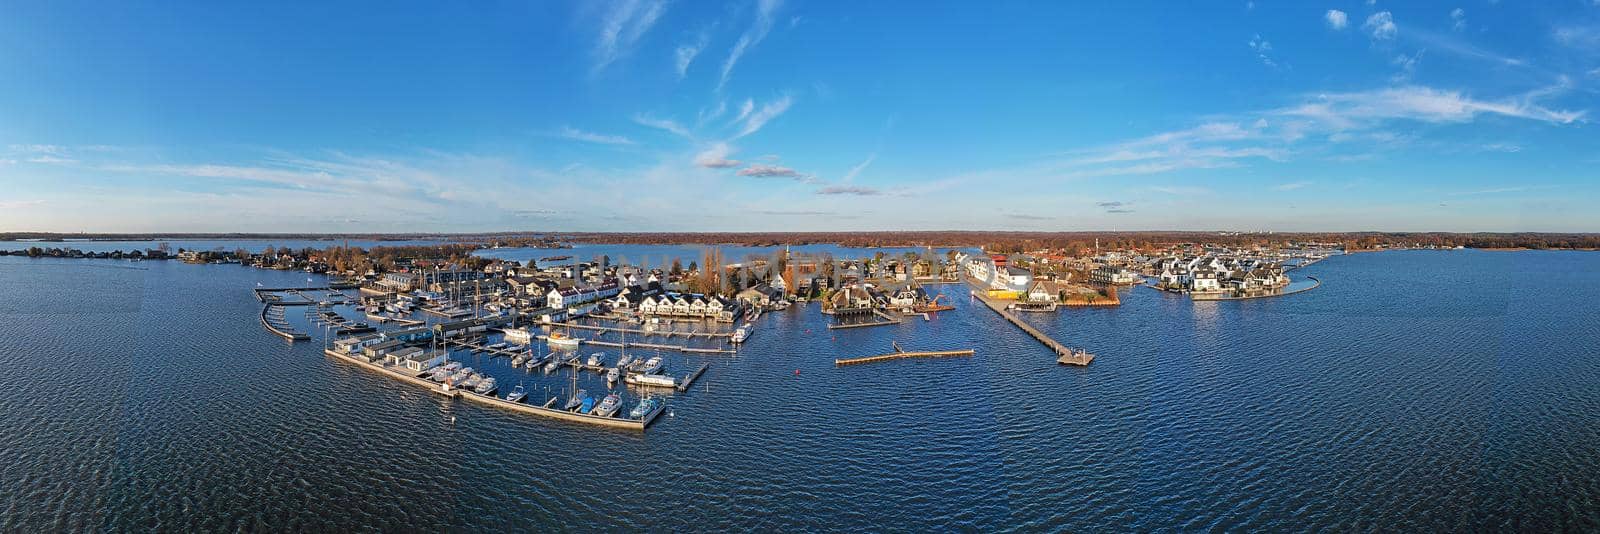 Panoramic aerial from the Loosdrechtse Plassen in the Netherlands by devy